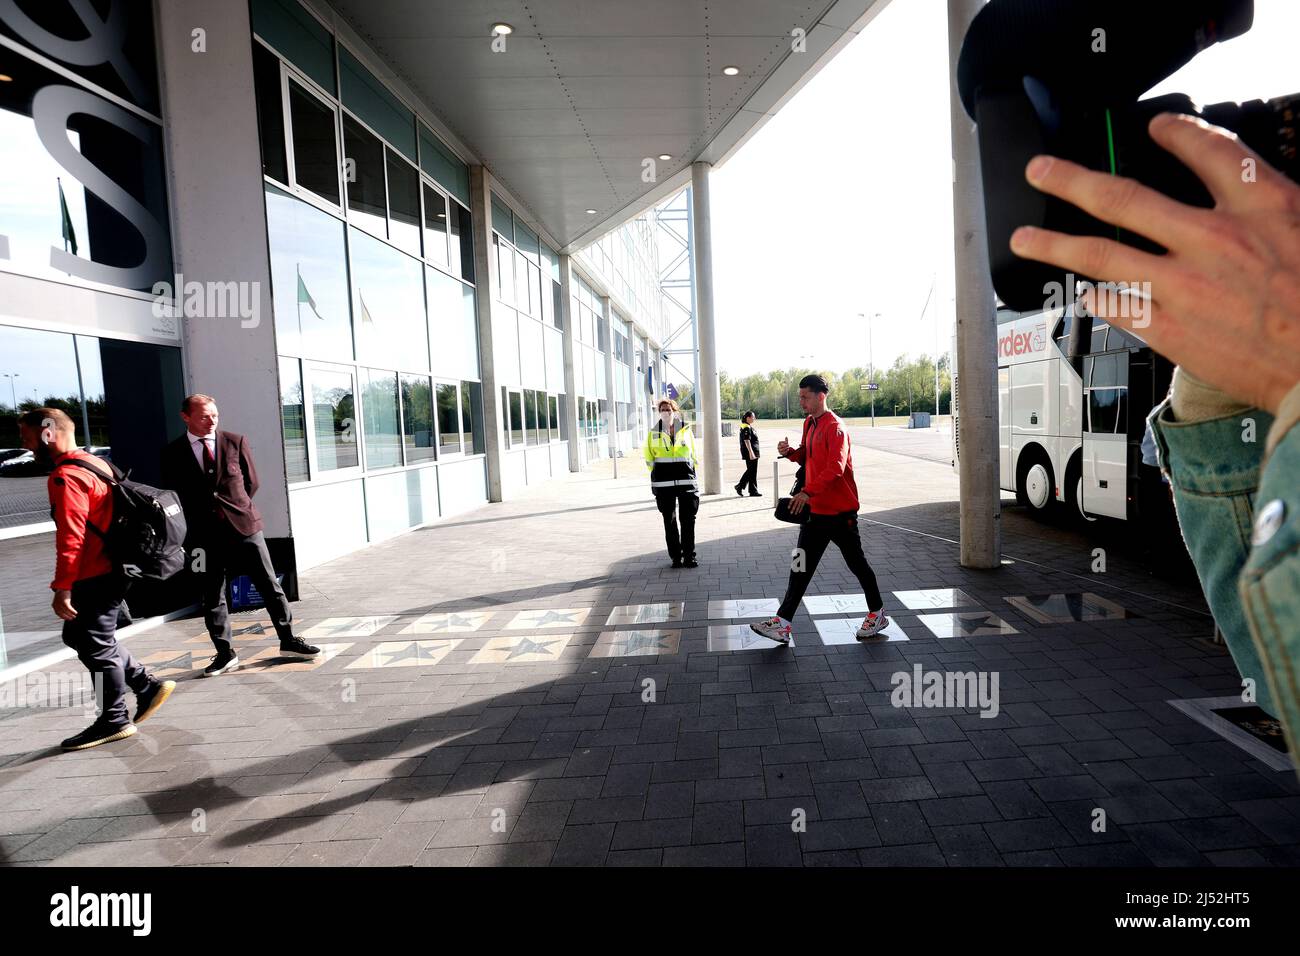 Arnhem, Netherlands. Vitesse, April 19, 2022, ARNHEM - Sparta Rotterdam players arrive at the Gelredome stadium prior to the Dutch Eredivisie match between Vitesse and Sparta Rotterdam on April 19, 2022 in Arnhem, Netherlands. Vitesse - Sparta was suspended in injury time on March 4 after misconduct by the home crowd. ANP JEROEN PUTMANS Stock Photo